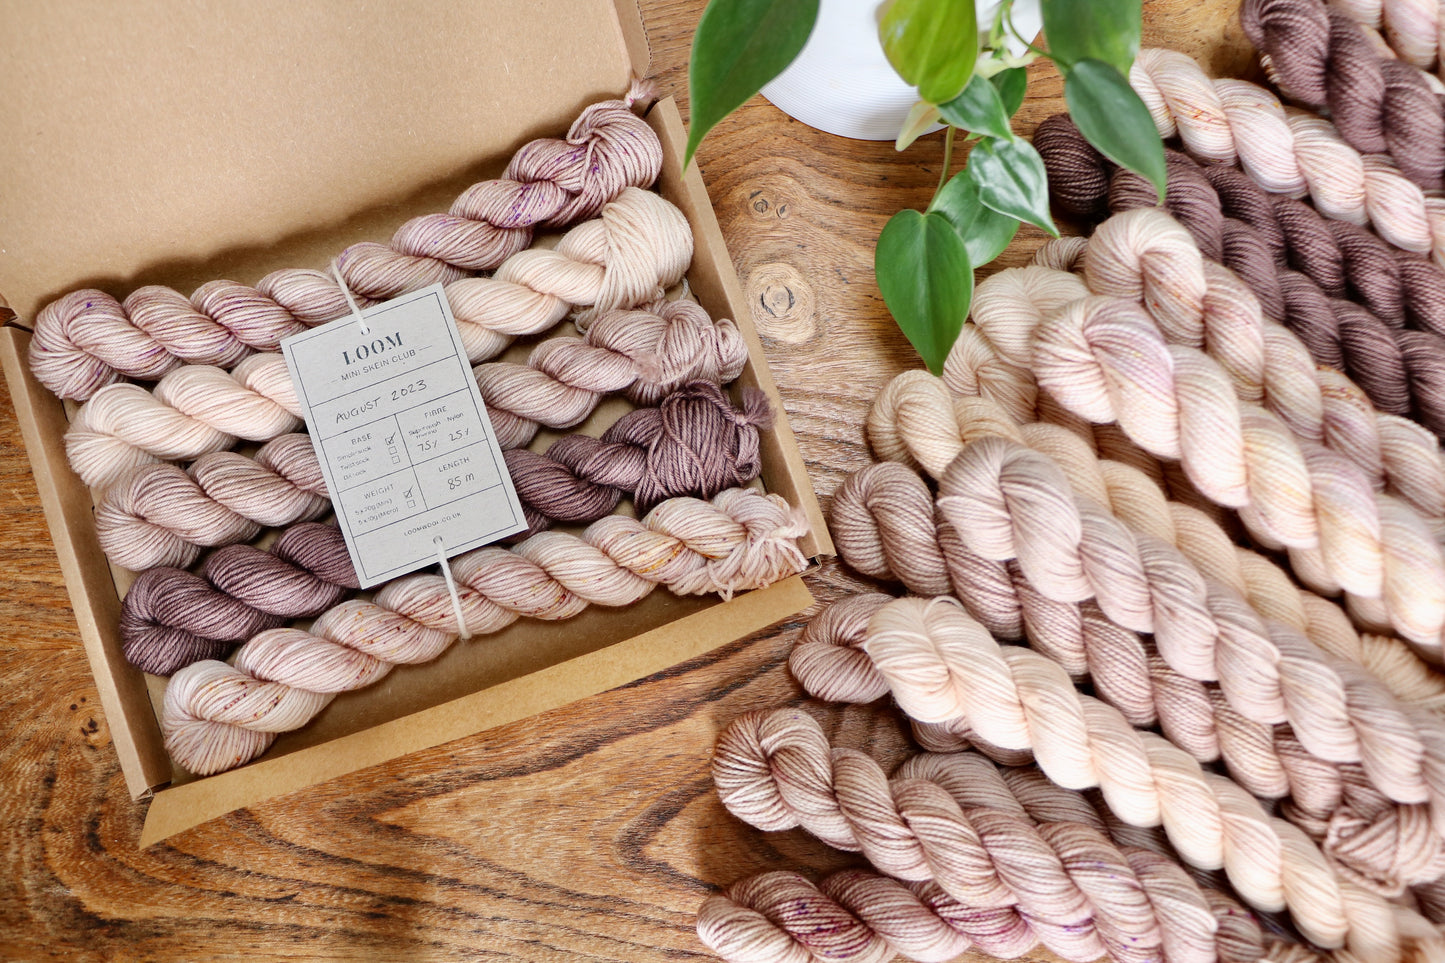 Mini Skein Club // Monthly Subscription